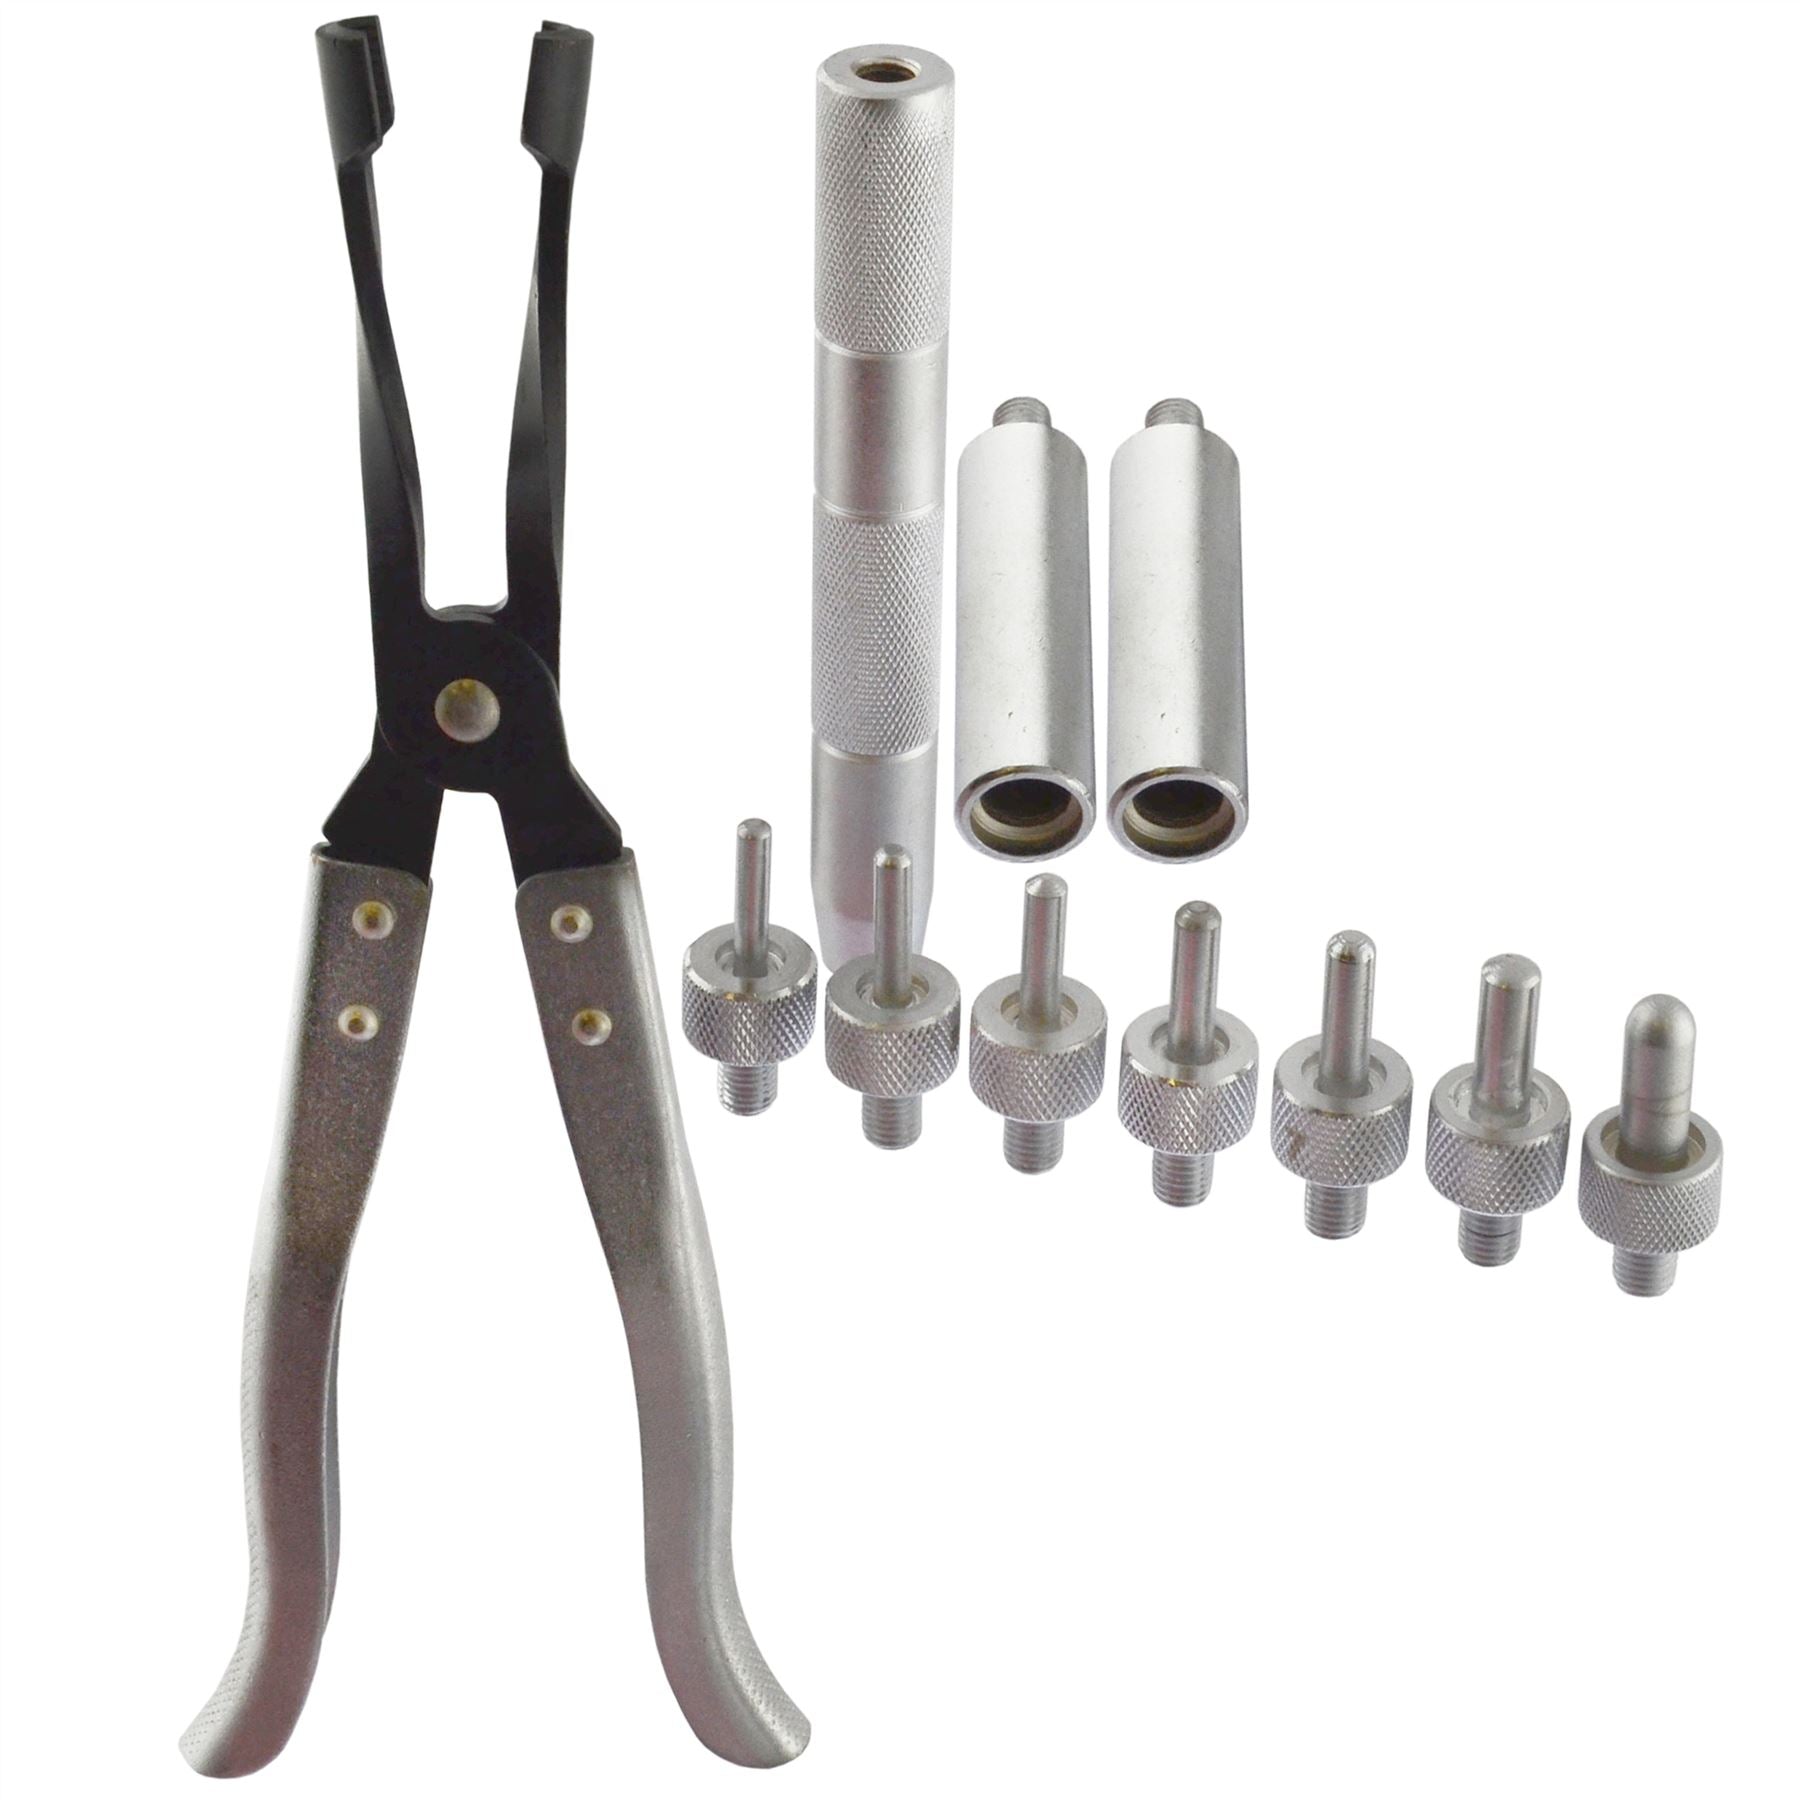 Valve Stem Seal / Seating Tool Remover And Installer Pliers Set / Kit 11pc AN027